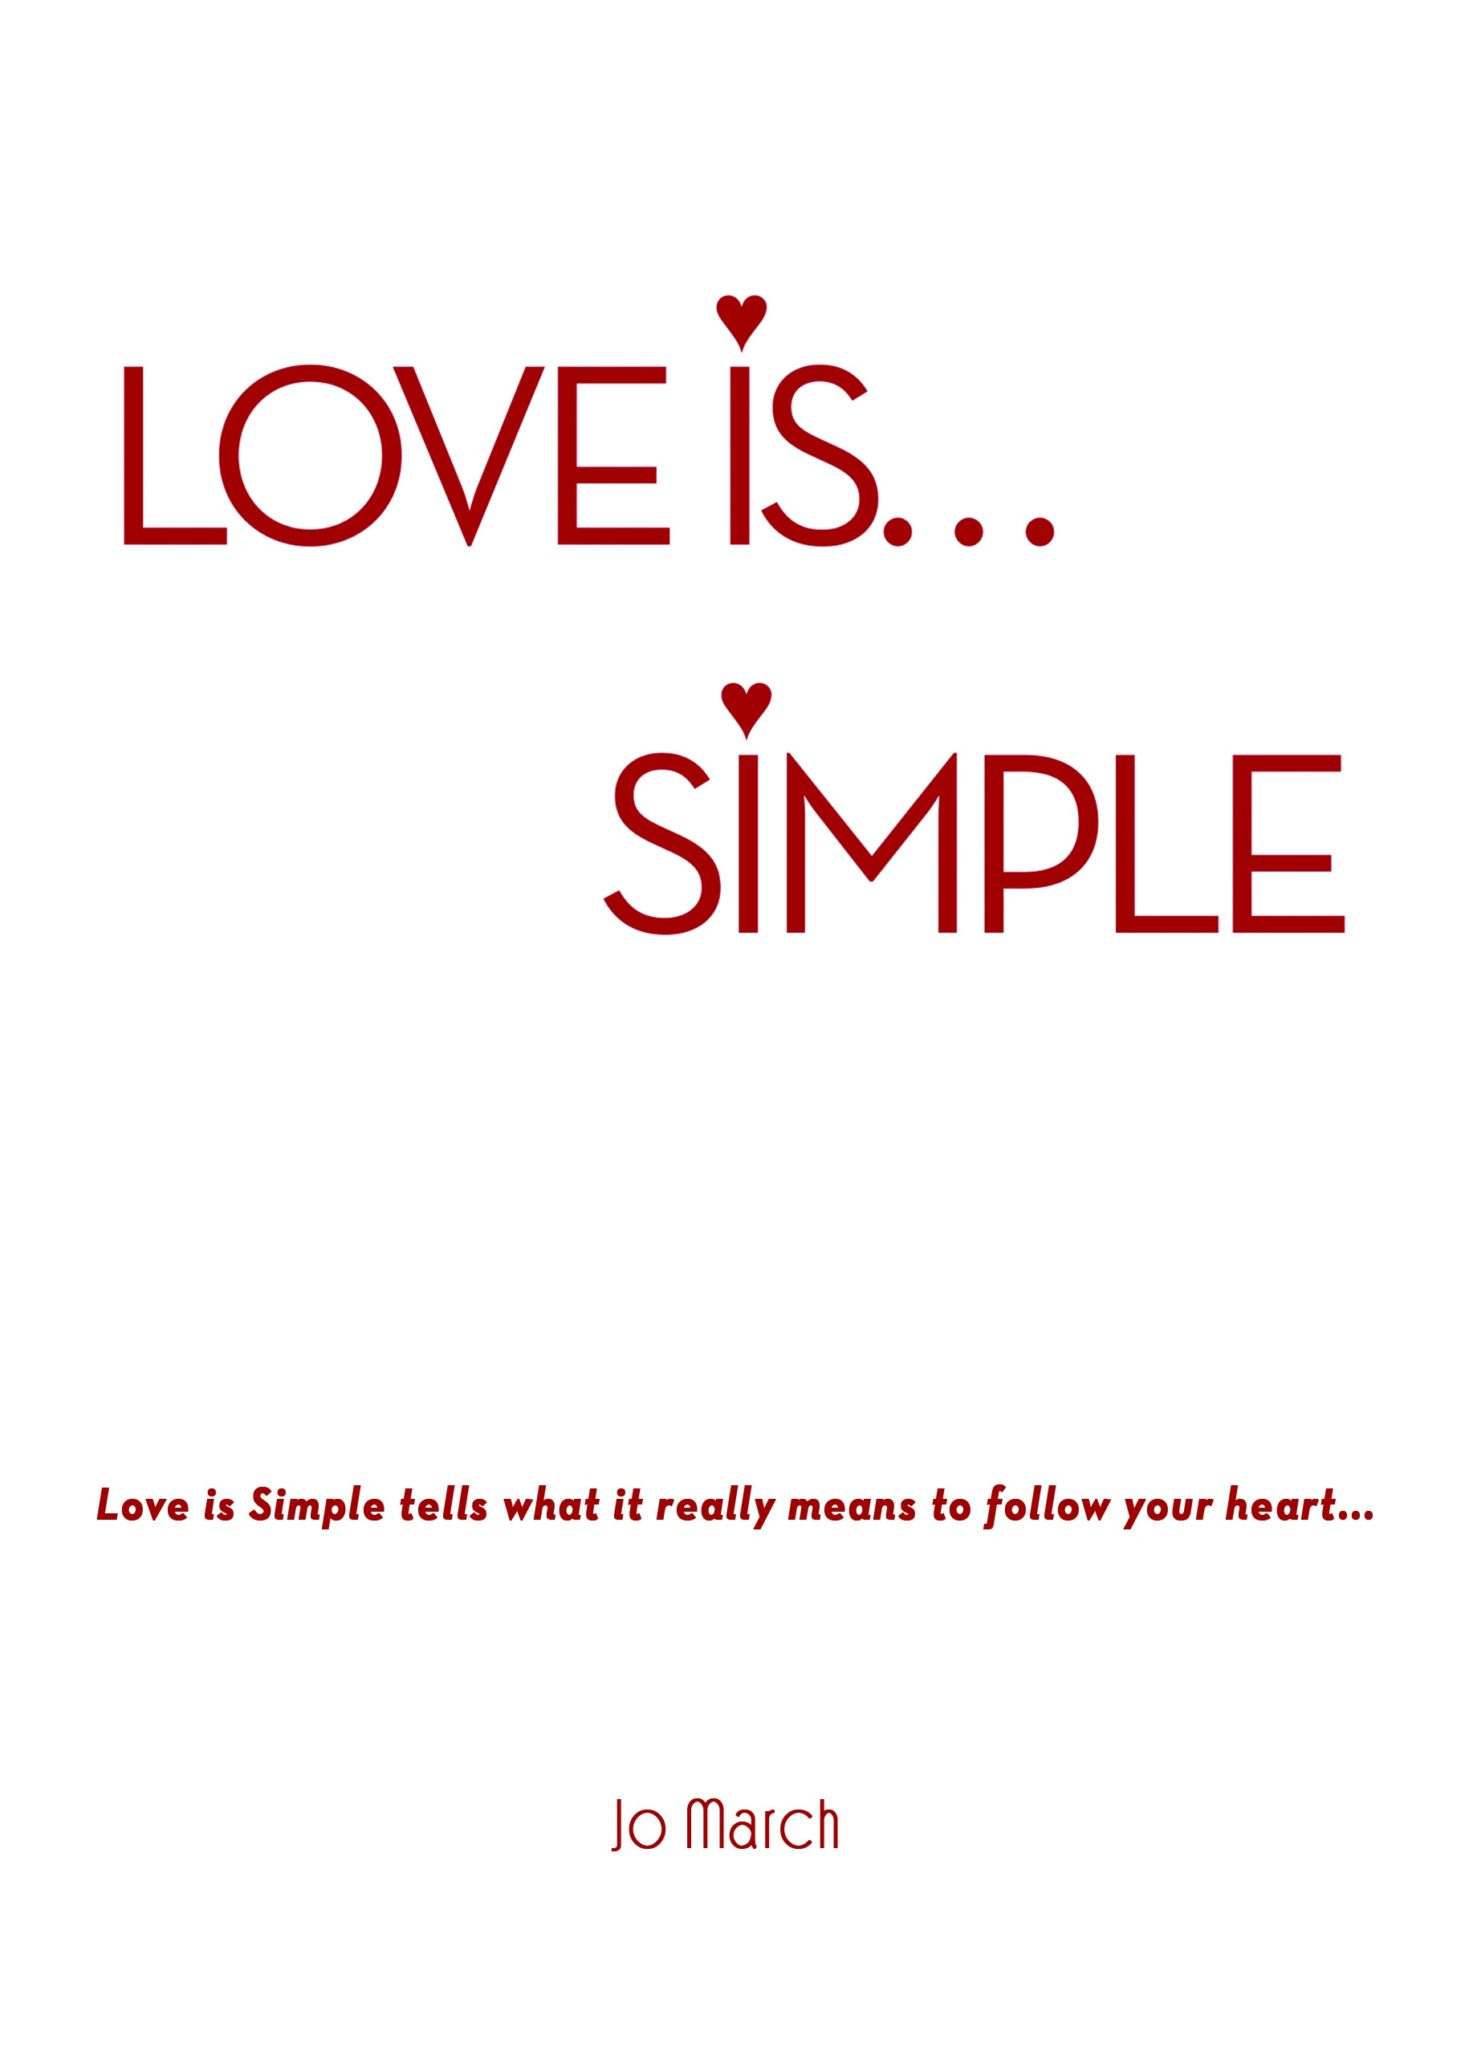 book cover Jo March "Love is simple!"